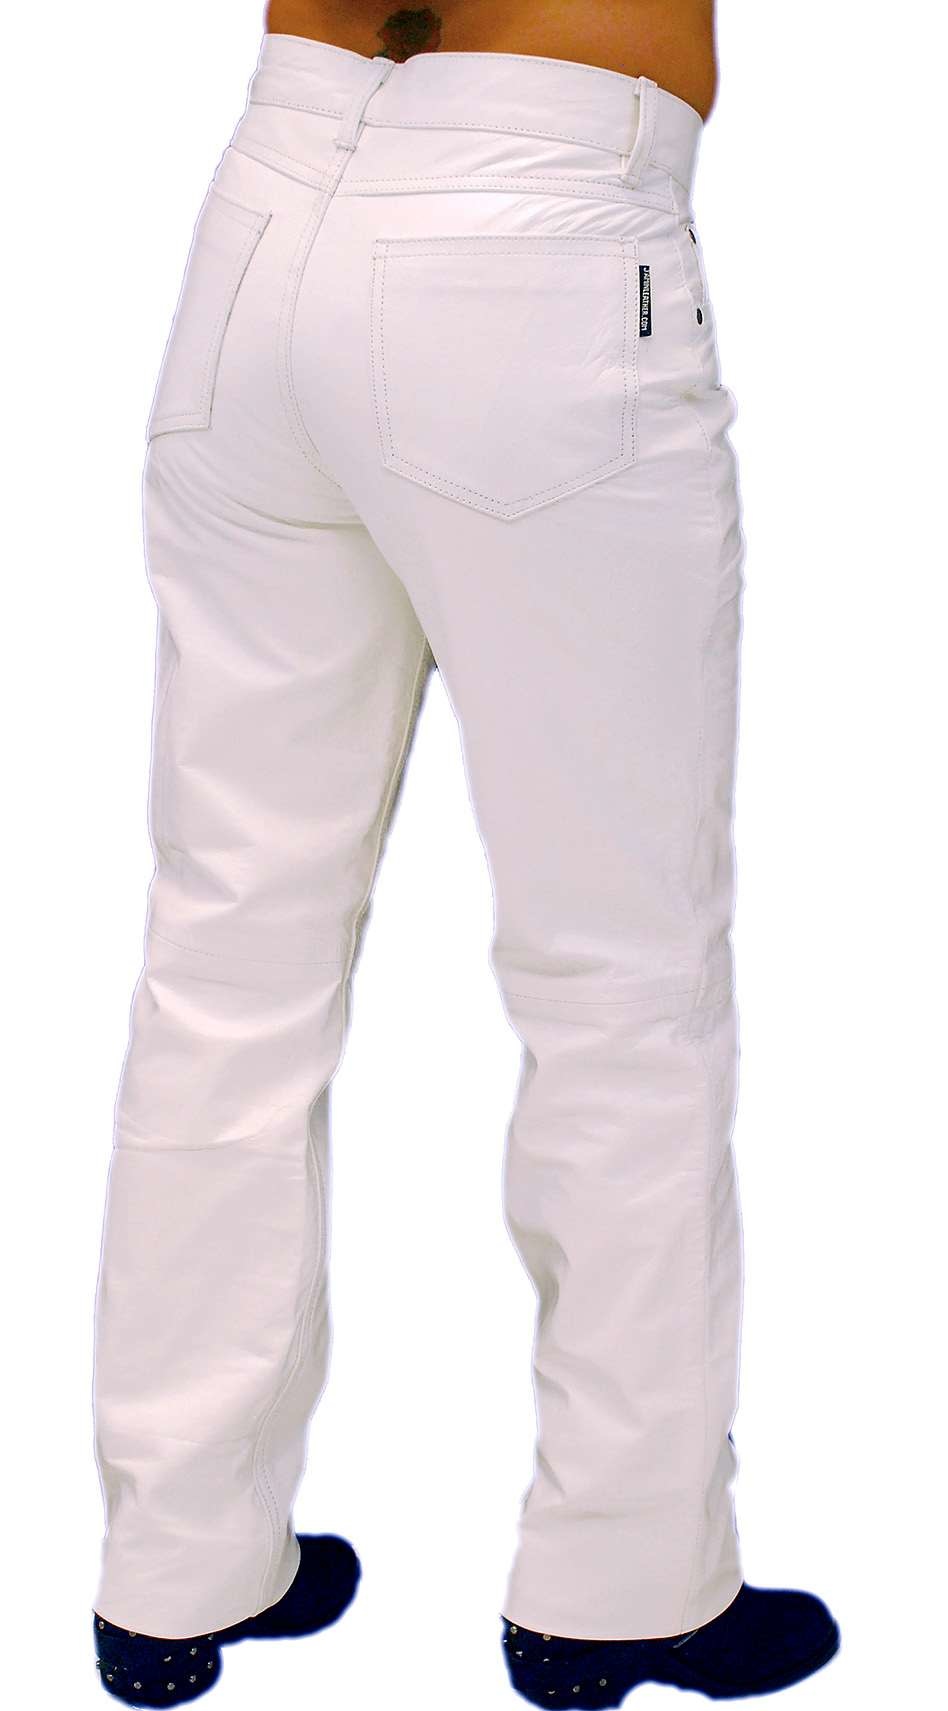 Melody White Leather Pants Ladies Leather Jeans Eco Leather Winter Running  Tights Womens Leather Slacks Body Shaper